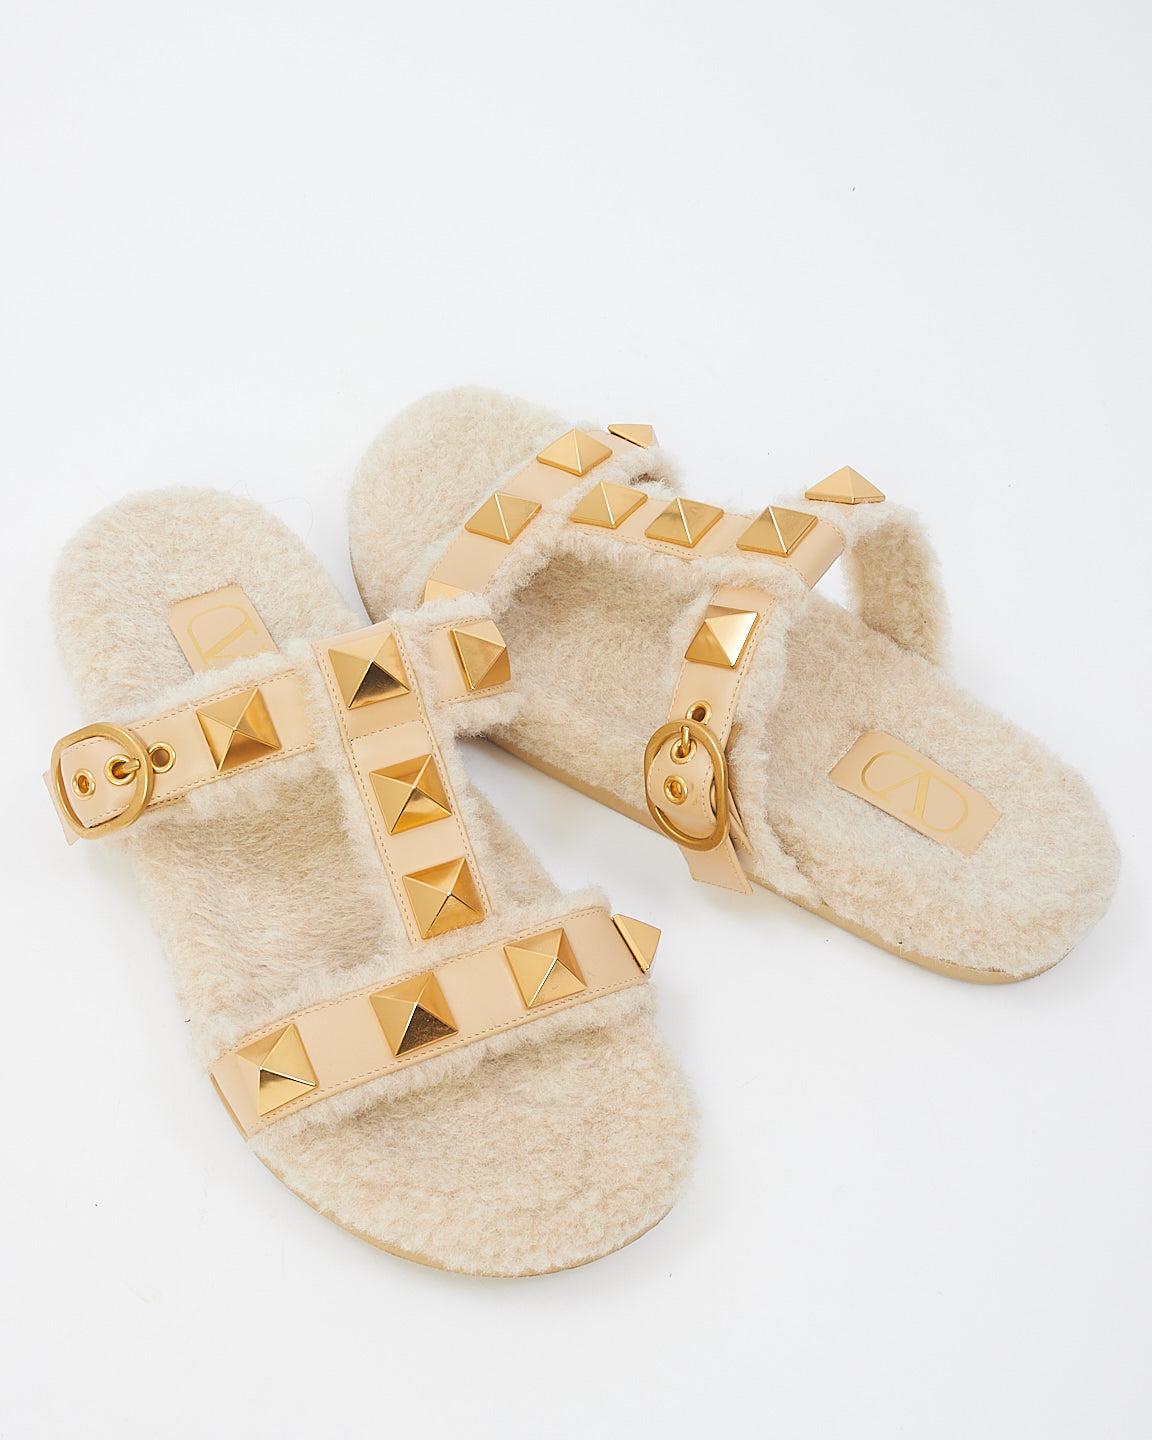 Valentino Beige Roman Stud Leather And Shearling Slide Sandals - 40